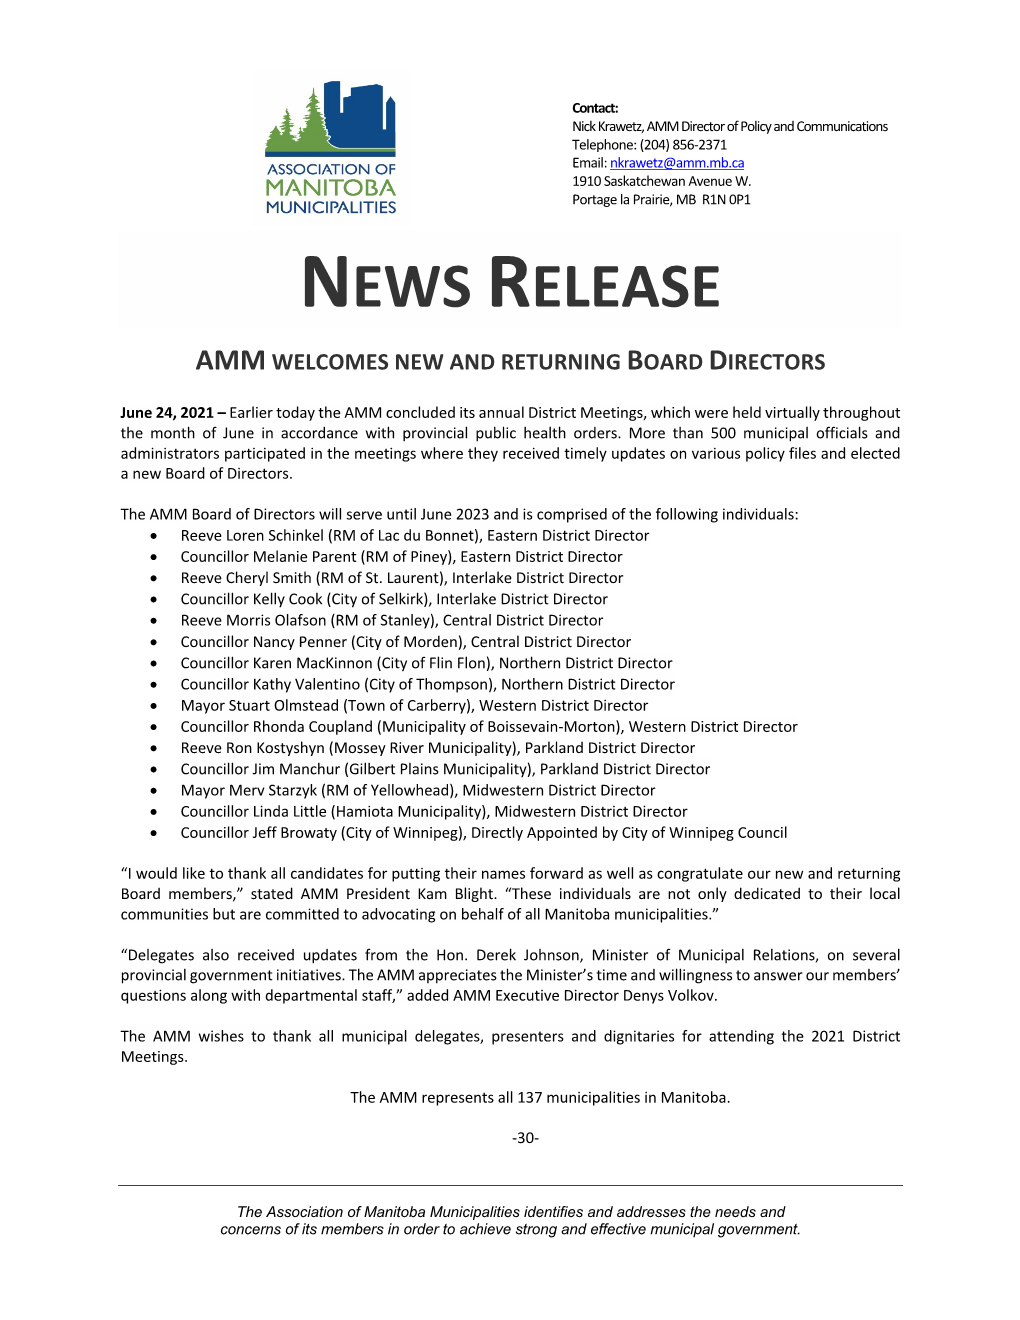 News Release Amm Welcomes New and Returning Board Directors